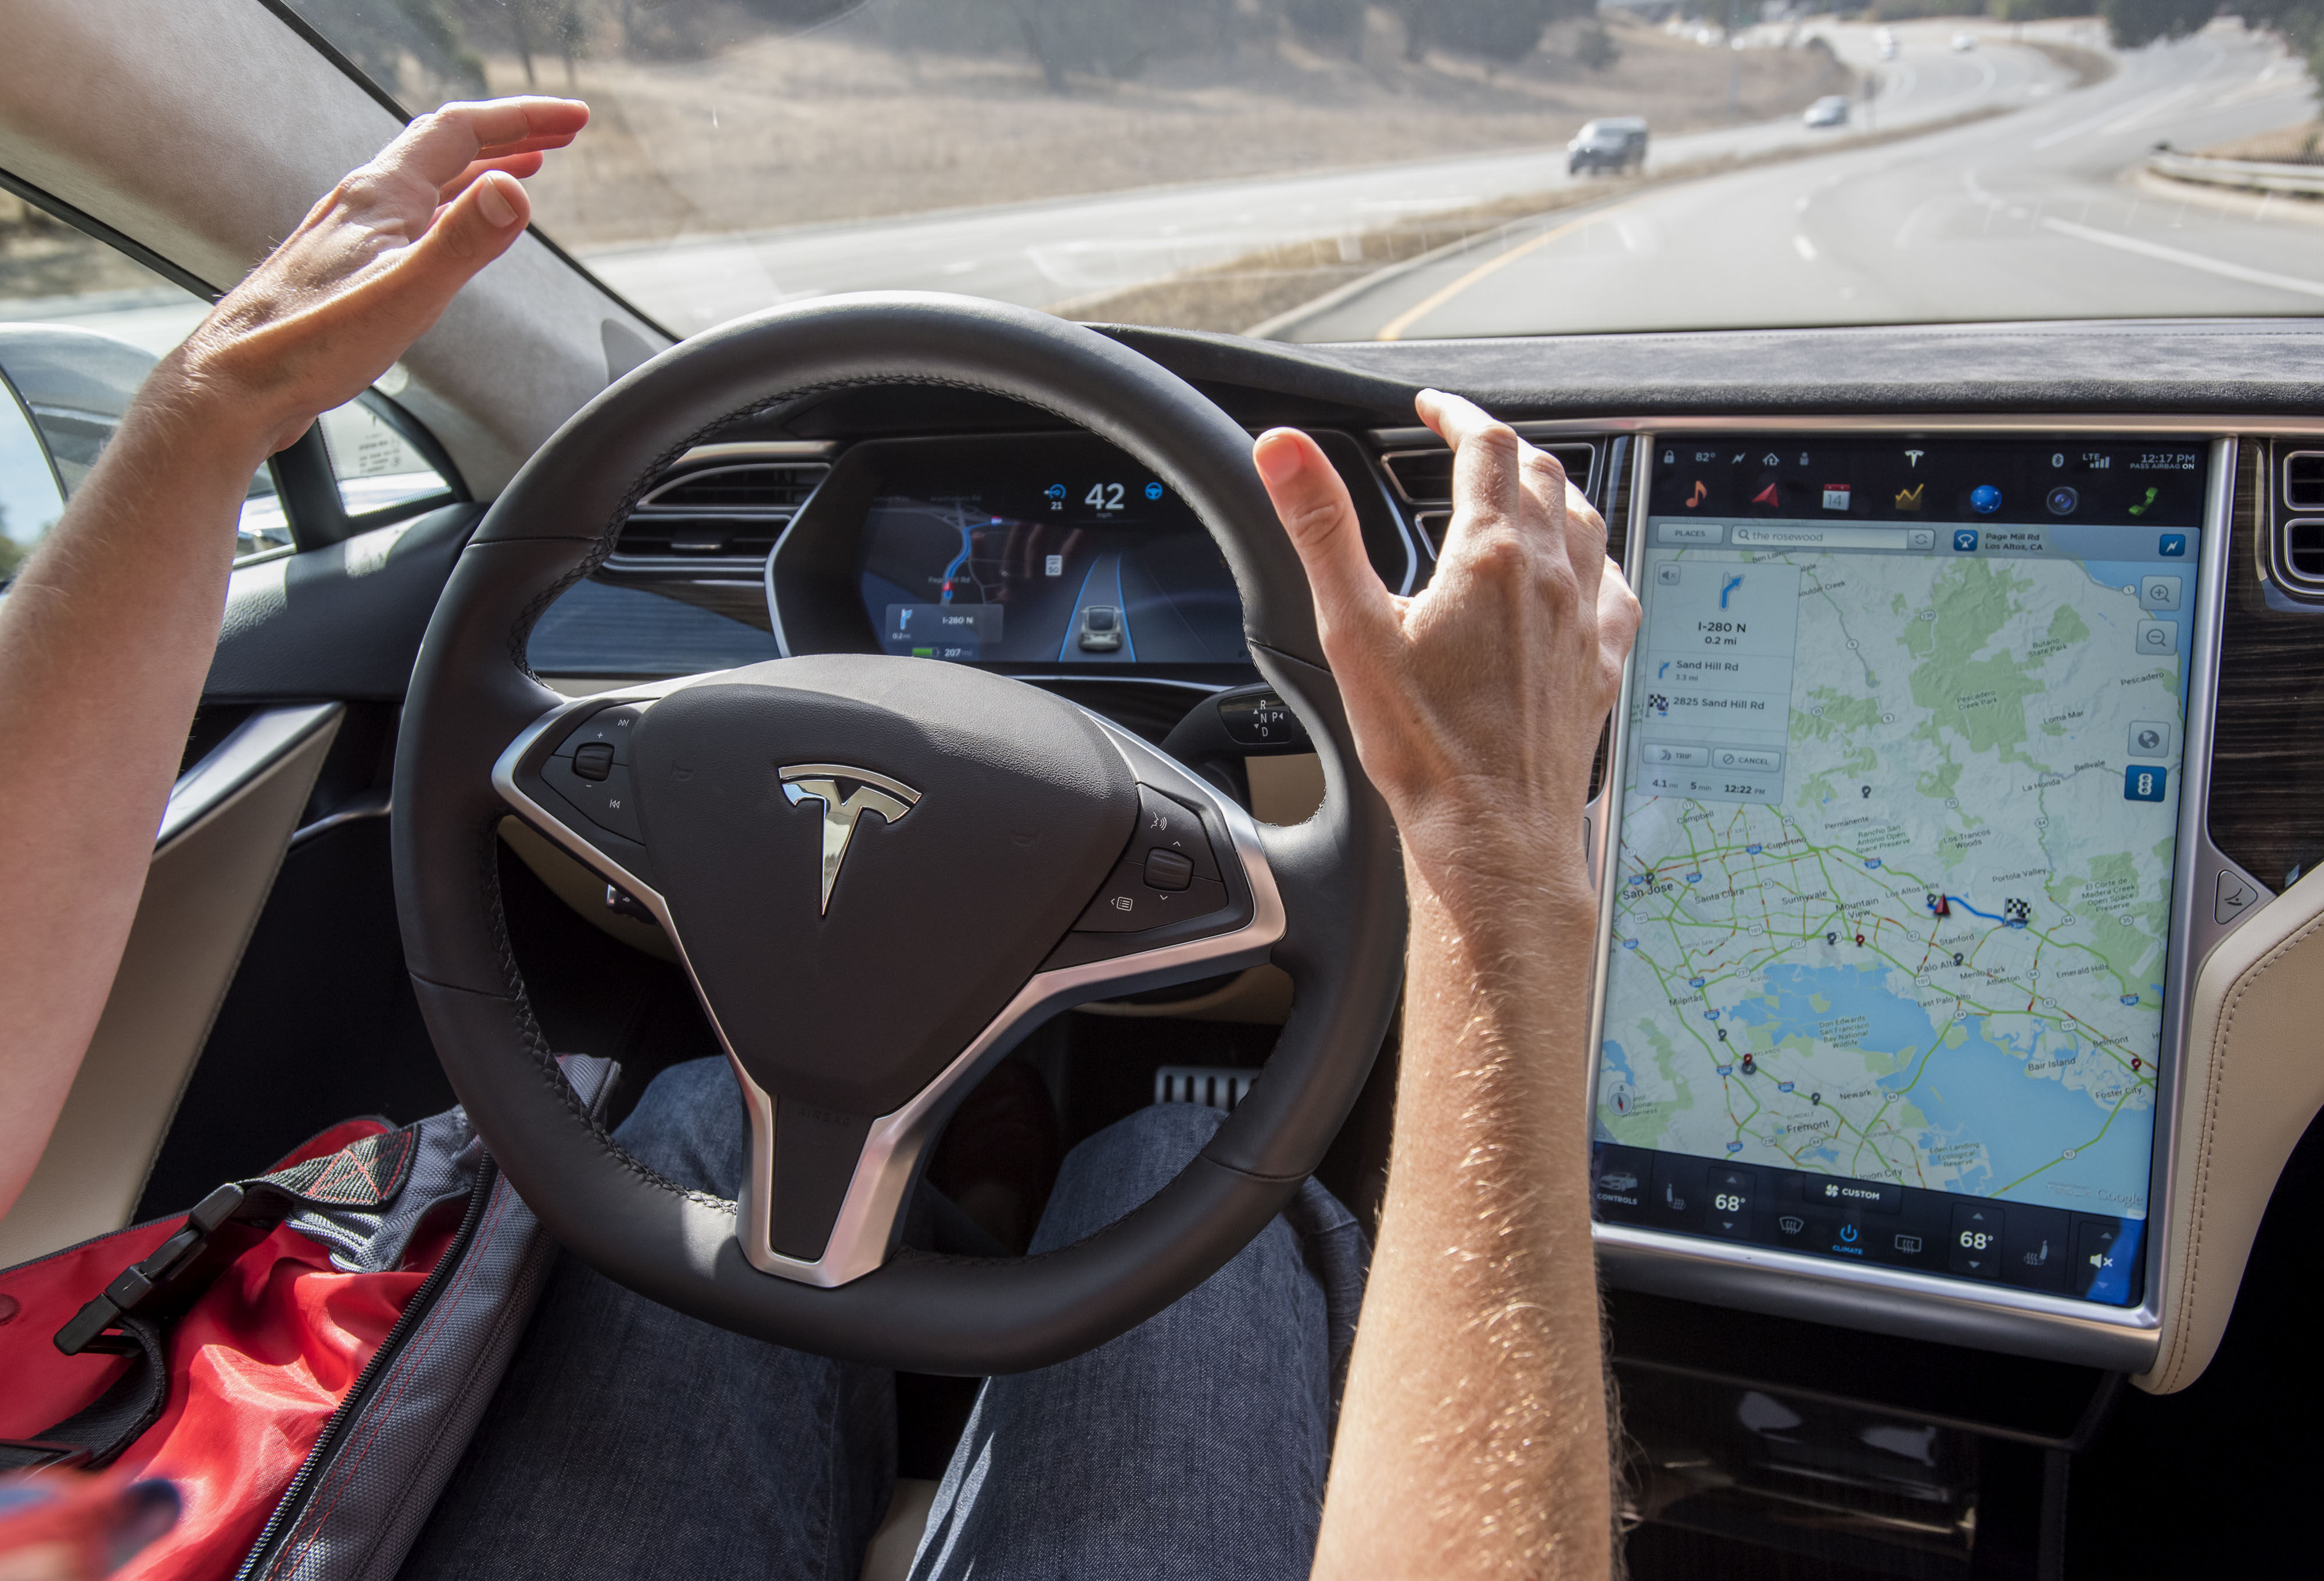 A test driver uses a Tesla Model S car equipped with autopilot and GPS in Palo Alto, California, in October 2015. The advent of technologies such as GPS and AI chatbots has raised fears among some that their increased use will lead to essential human skills atrophying. Photo: Bloomberg